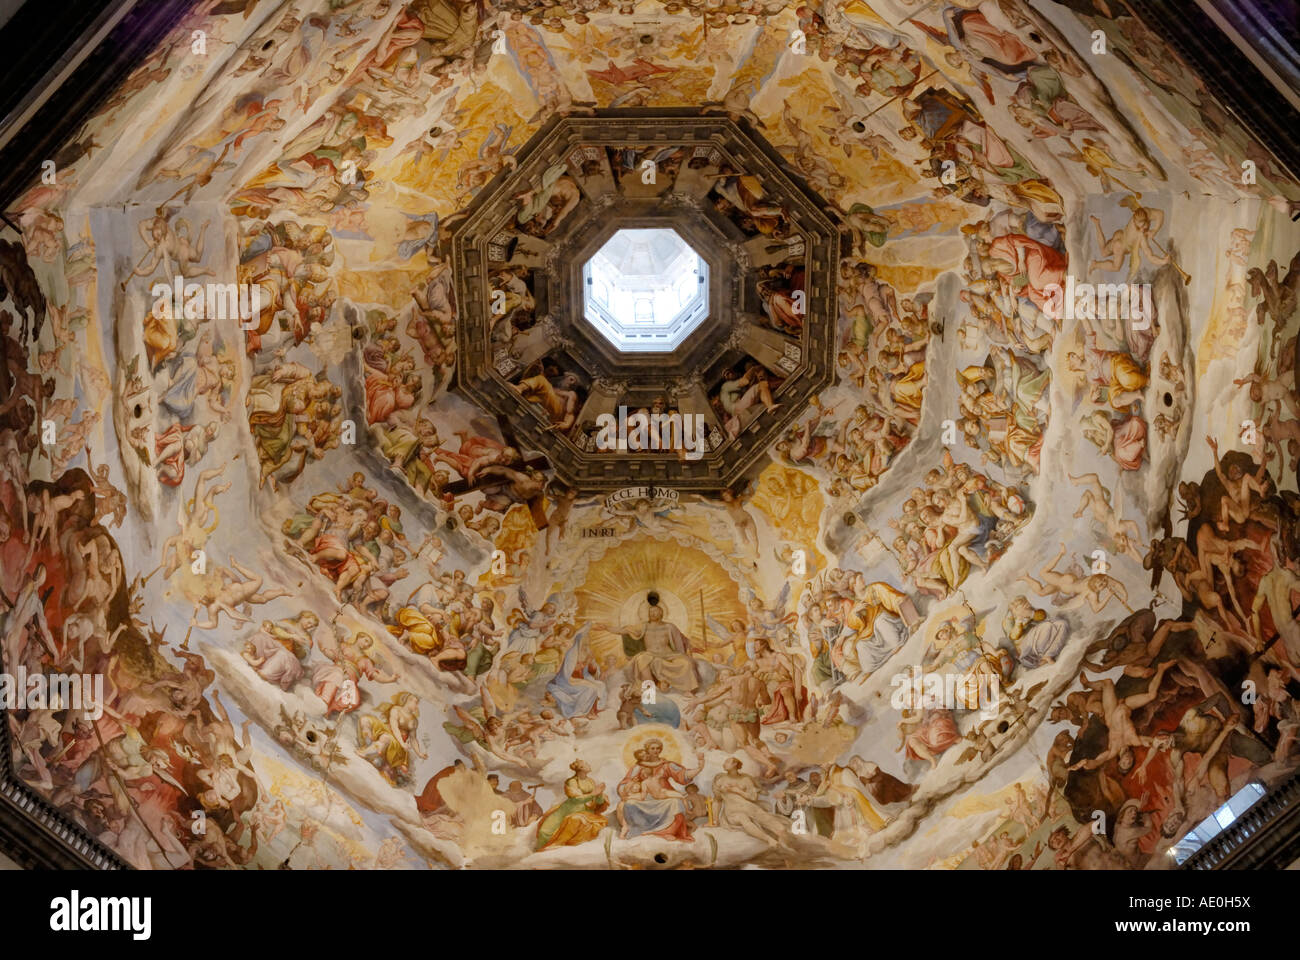 Painting on ceiling of the Duomo Santa Maria del Fiore, dome of the cathedral, Florence, Italy Stock Photo